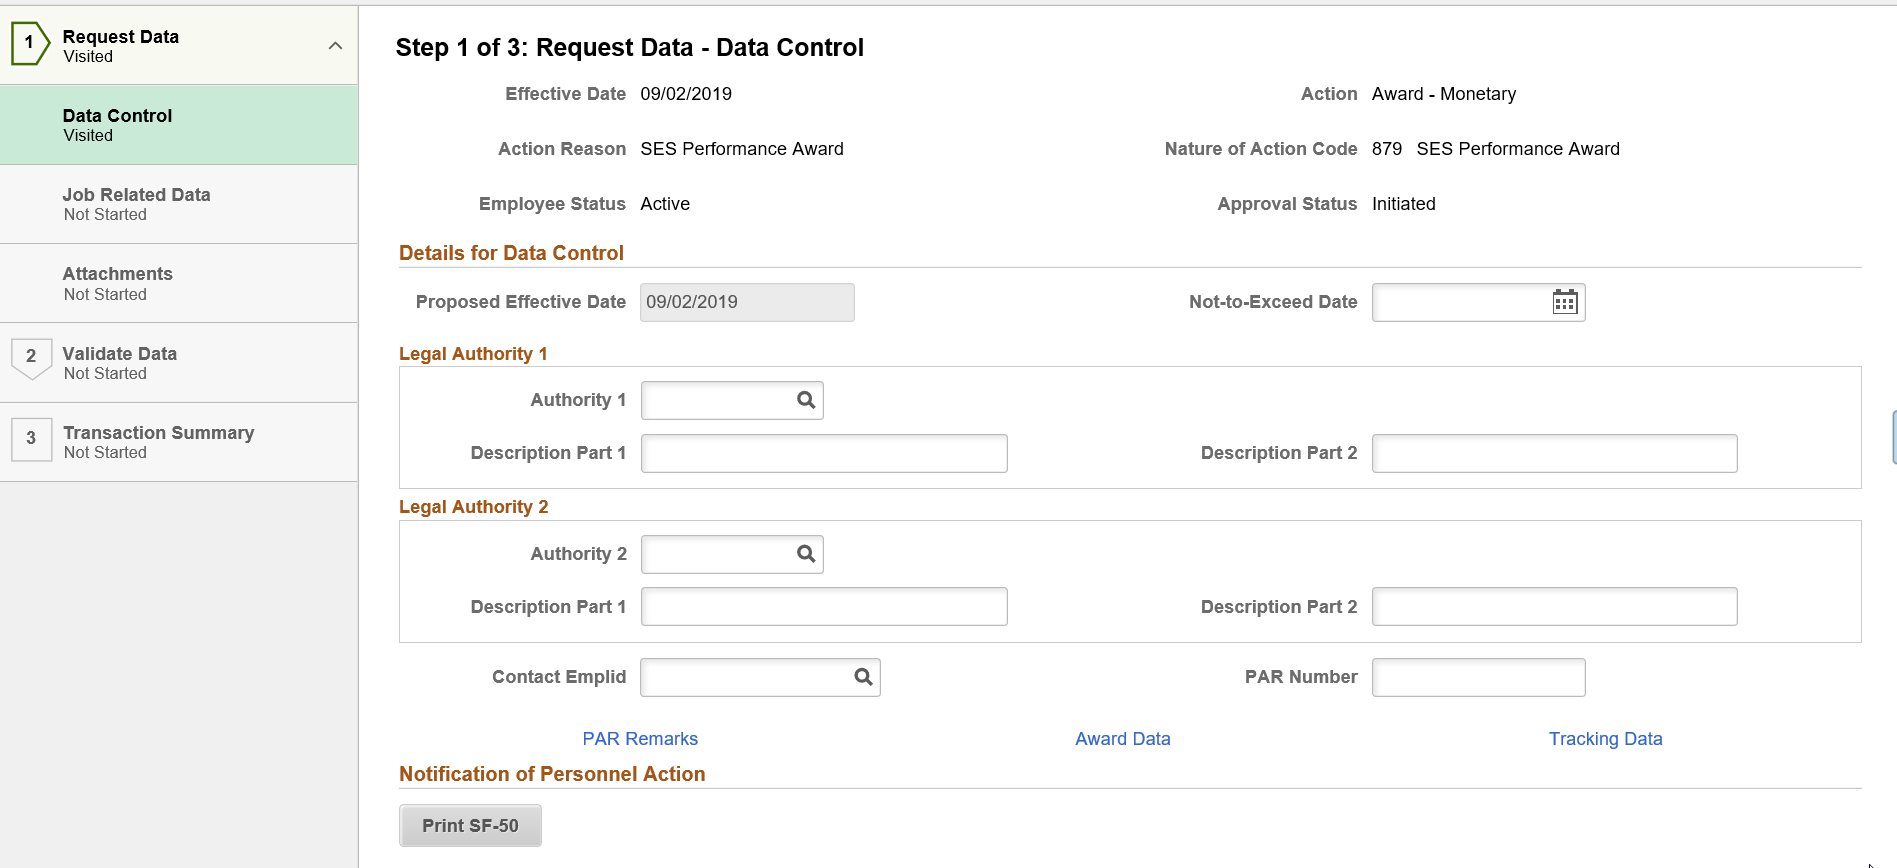 Request Data - Data Control page